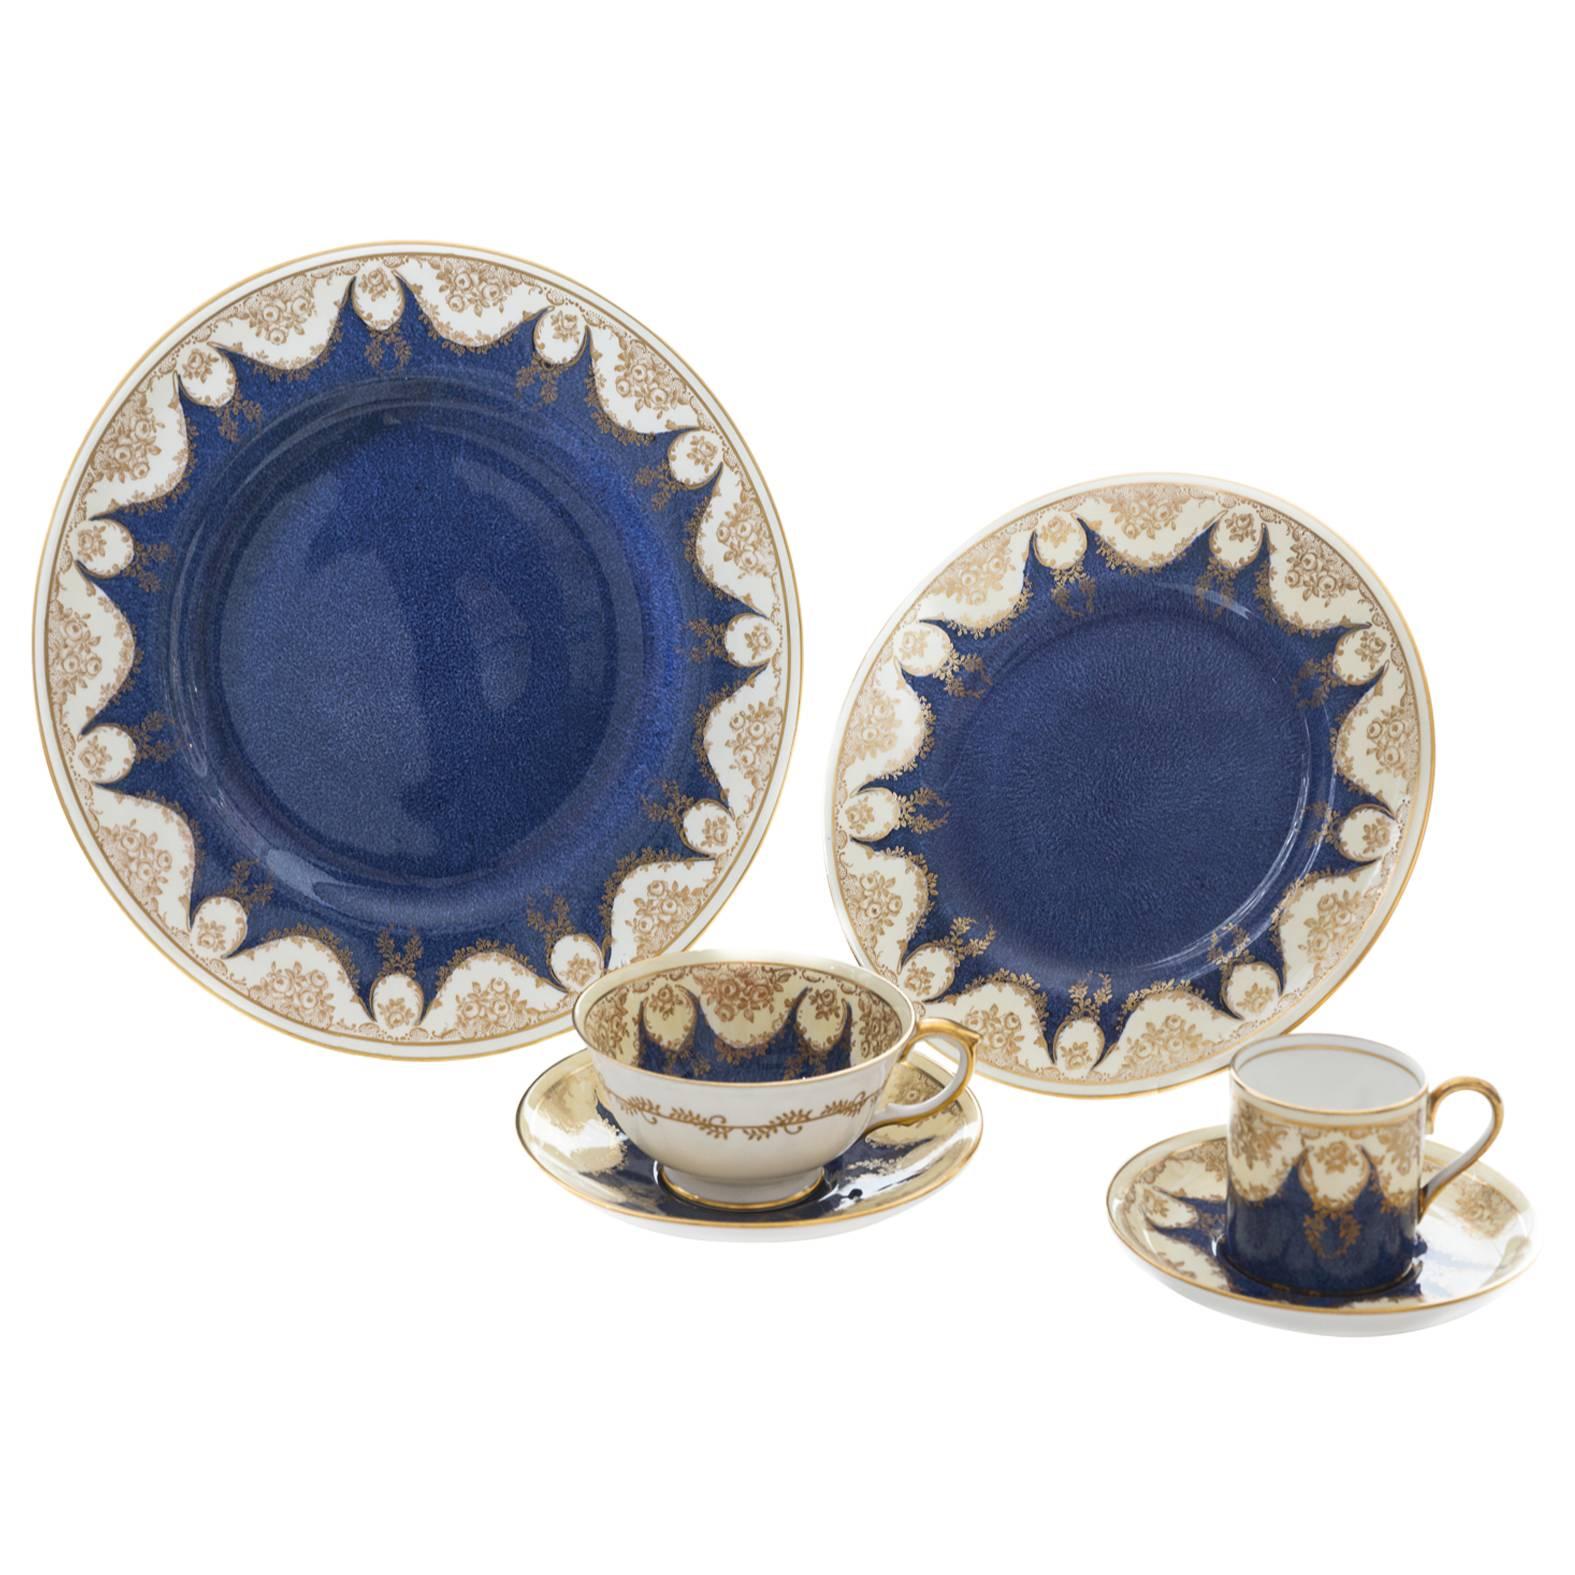 Complete Service for 12, Antique English Crushed Lapis and Gilt Garland